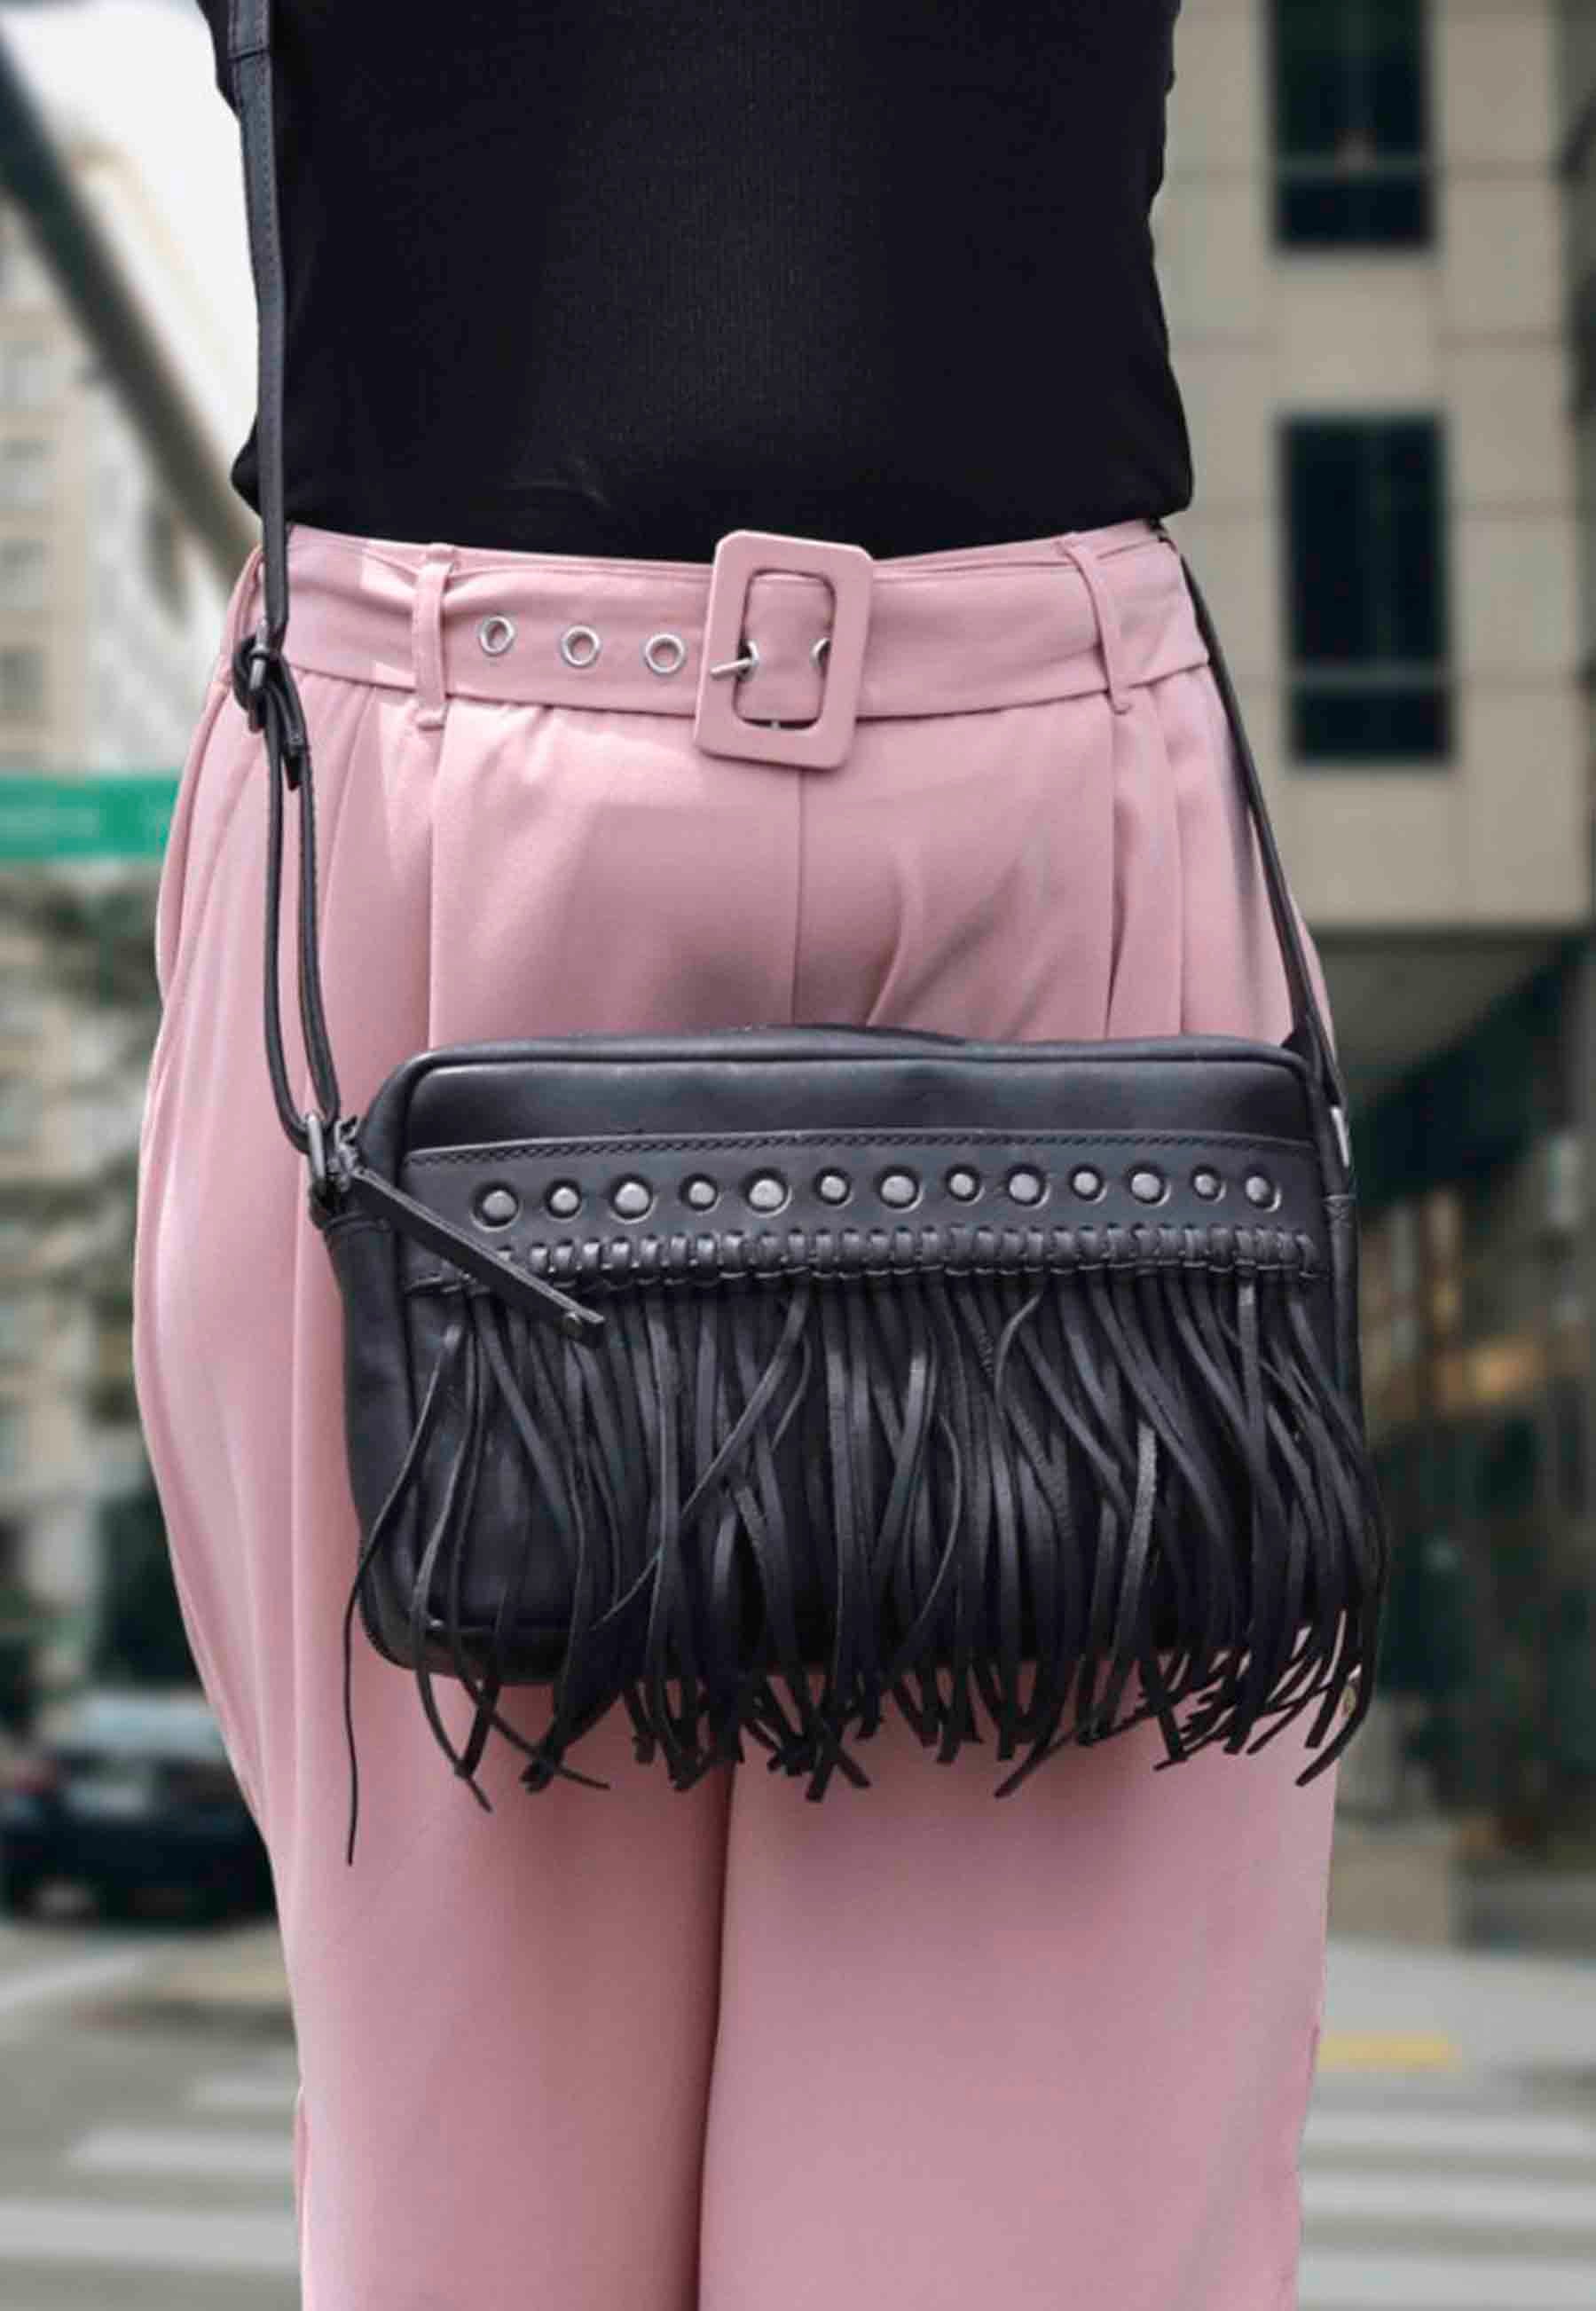 Fashion Small Crossbody Purses for Women Multi Pocket Travel Bag Over The  Shoulder with Extra Long Strap, Black - Walmart.com